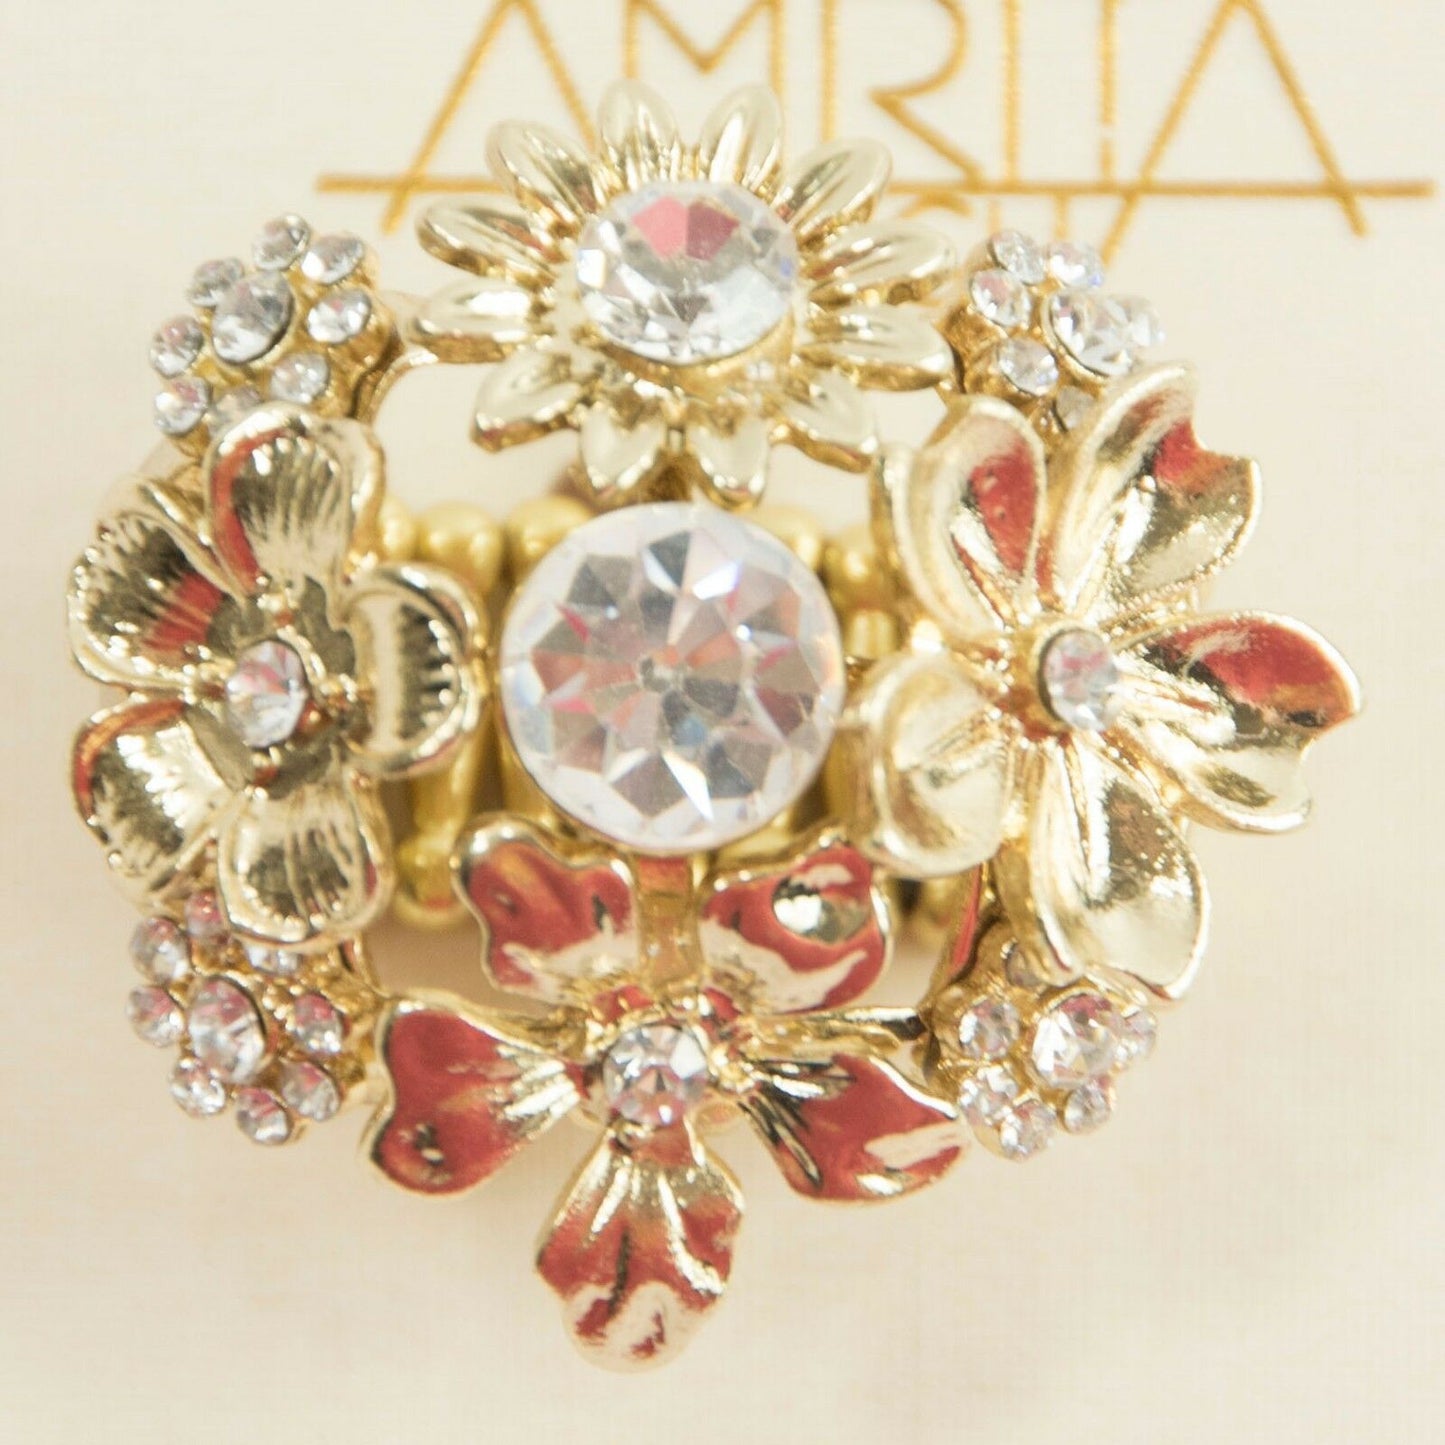 Amrita Singh Gold Crystal Flower Cluster Stretch Cocktail Ring RC 49 NWT